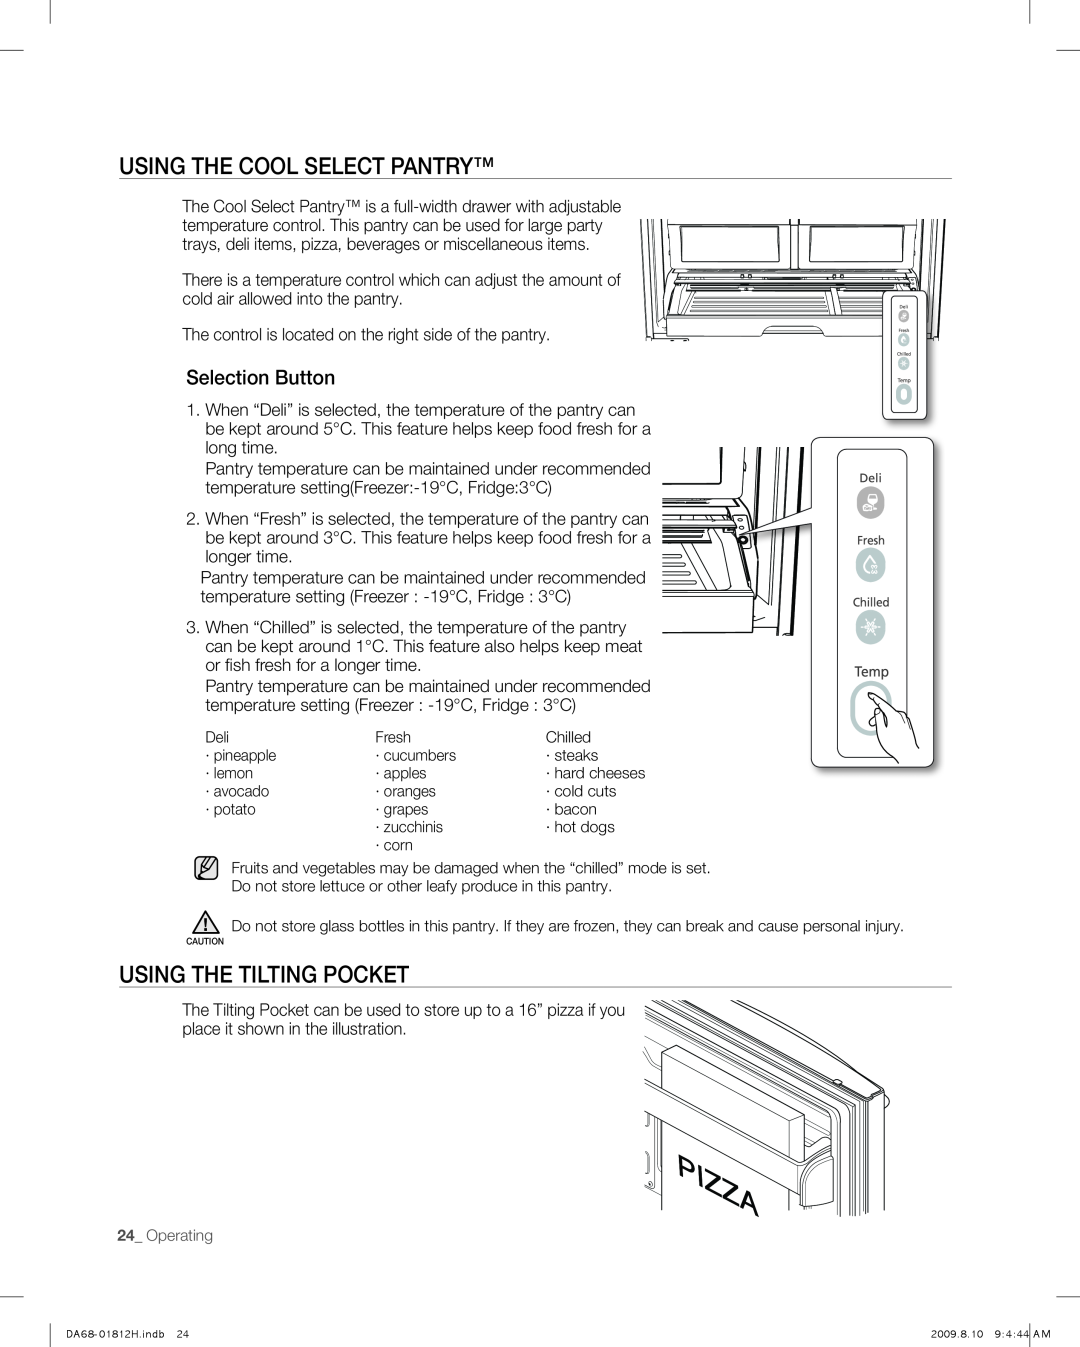 Samsung RF263 user manual Using The Cool Select Pantry, USING the tilting pocket, Selection Button 